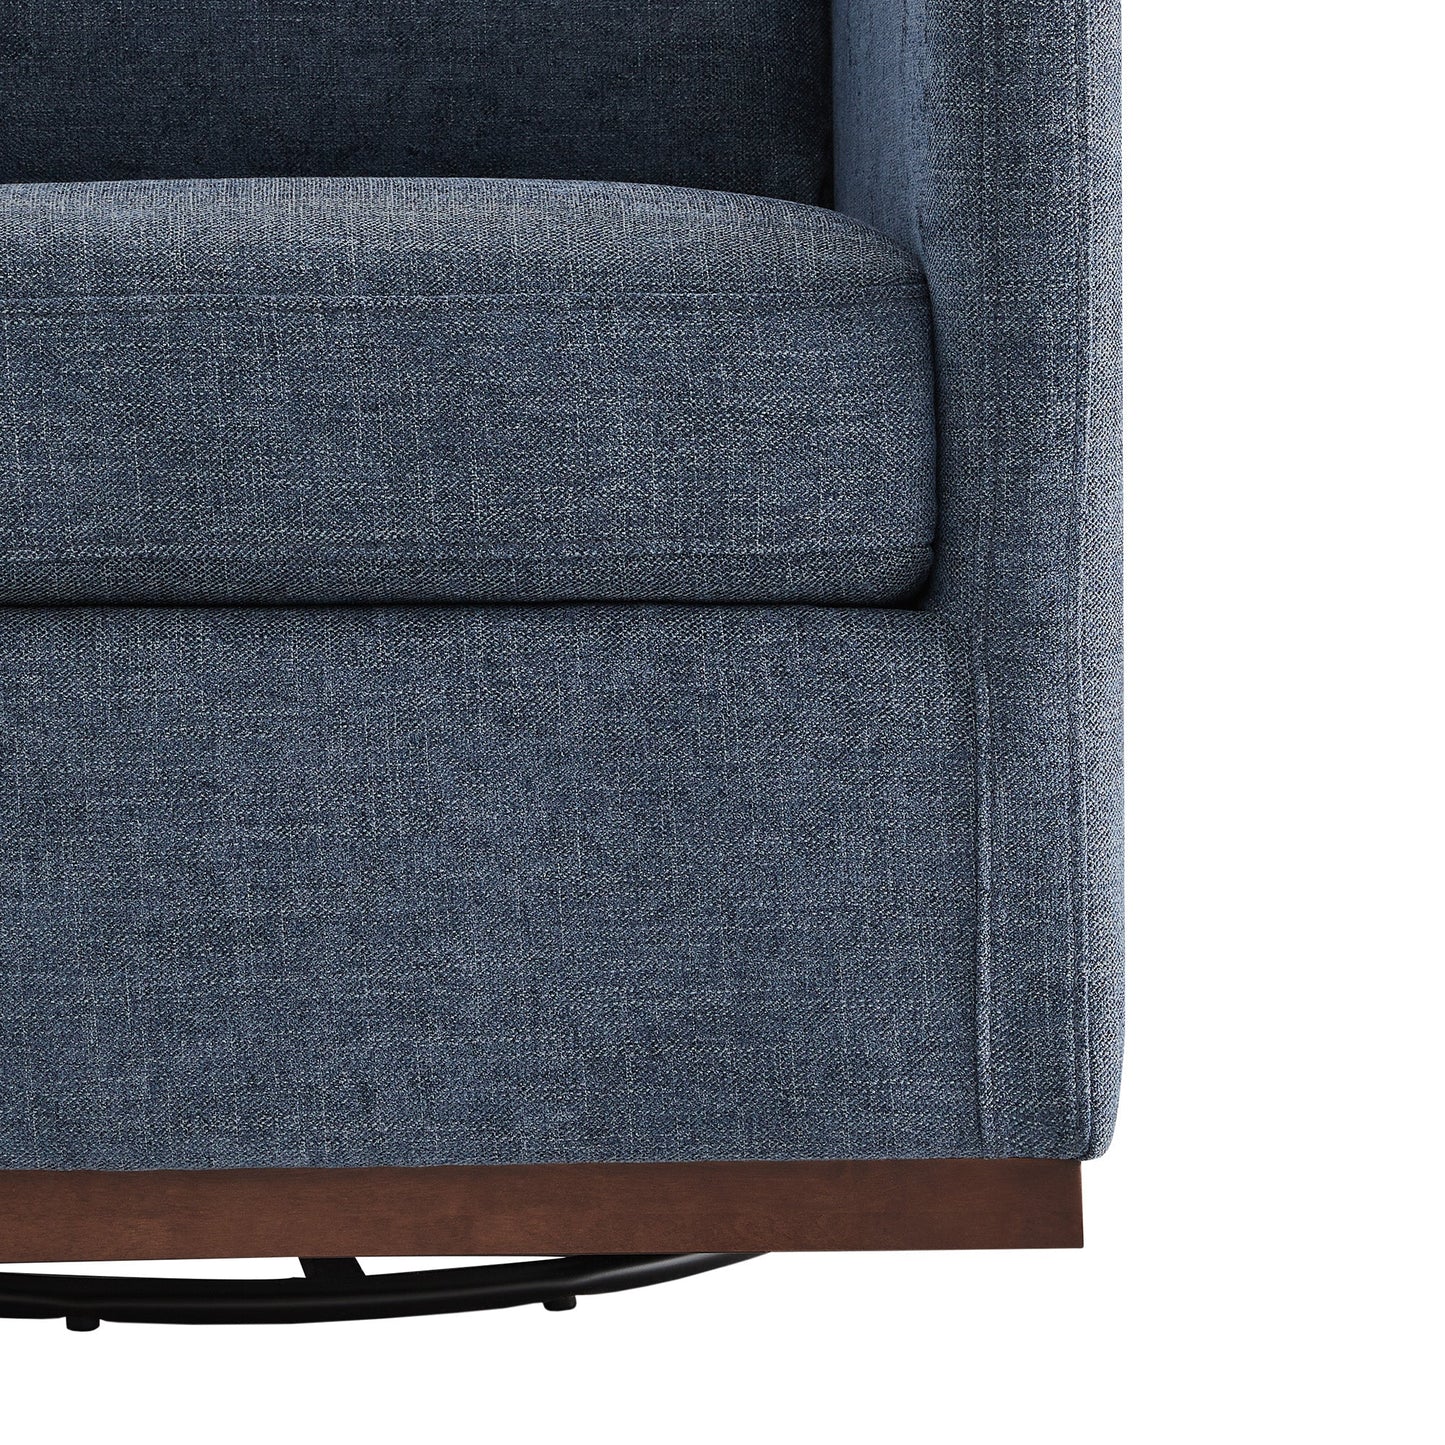 CHITA LIVING-Henry Swivel Accent Chair with Wood Base-Accent Chair-Fabric-Blue-